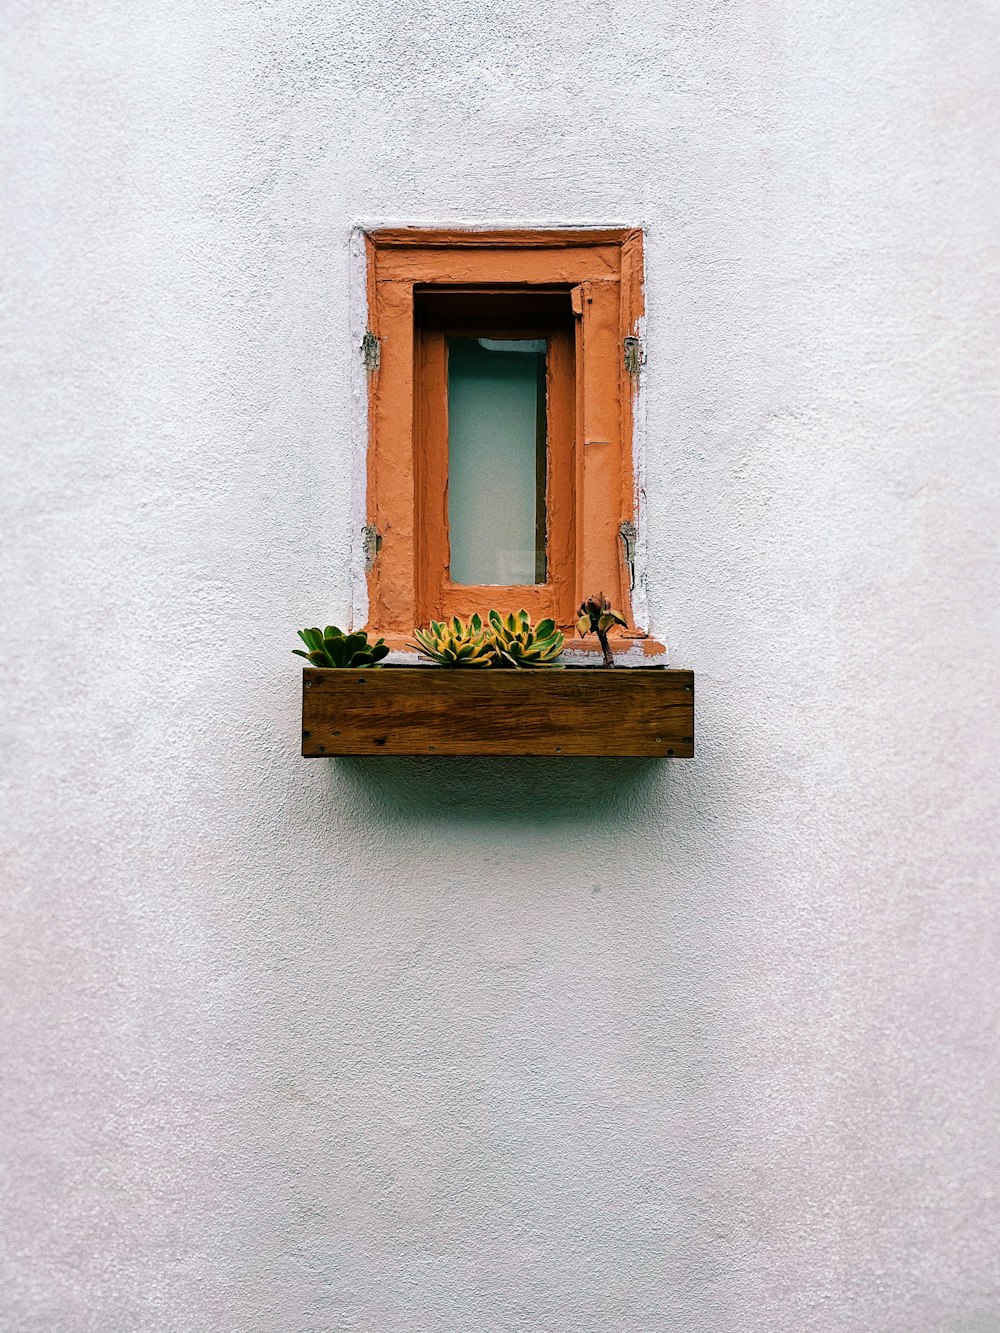 green plant on brown wooden window